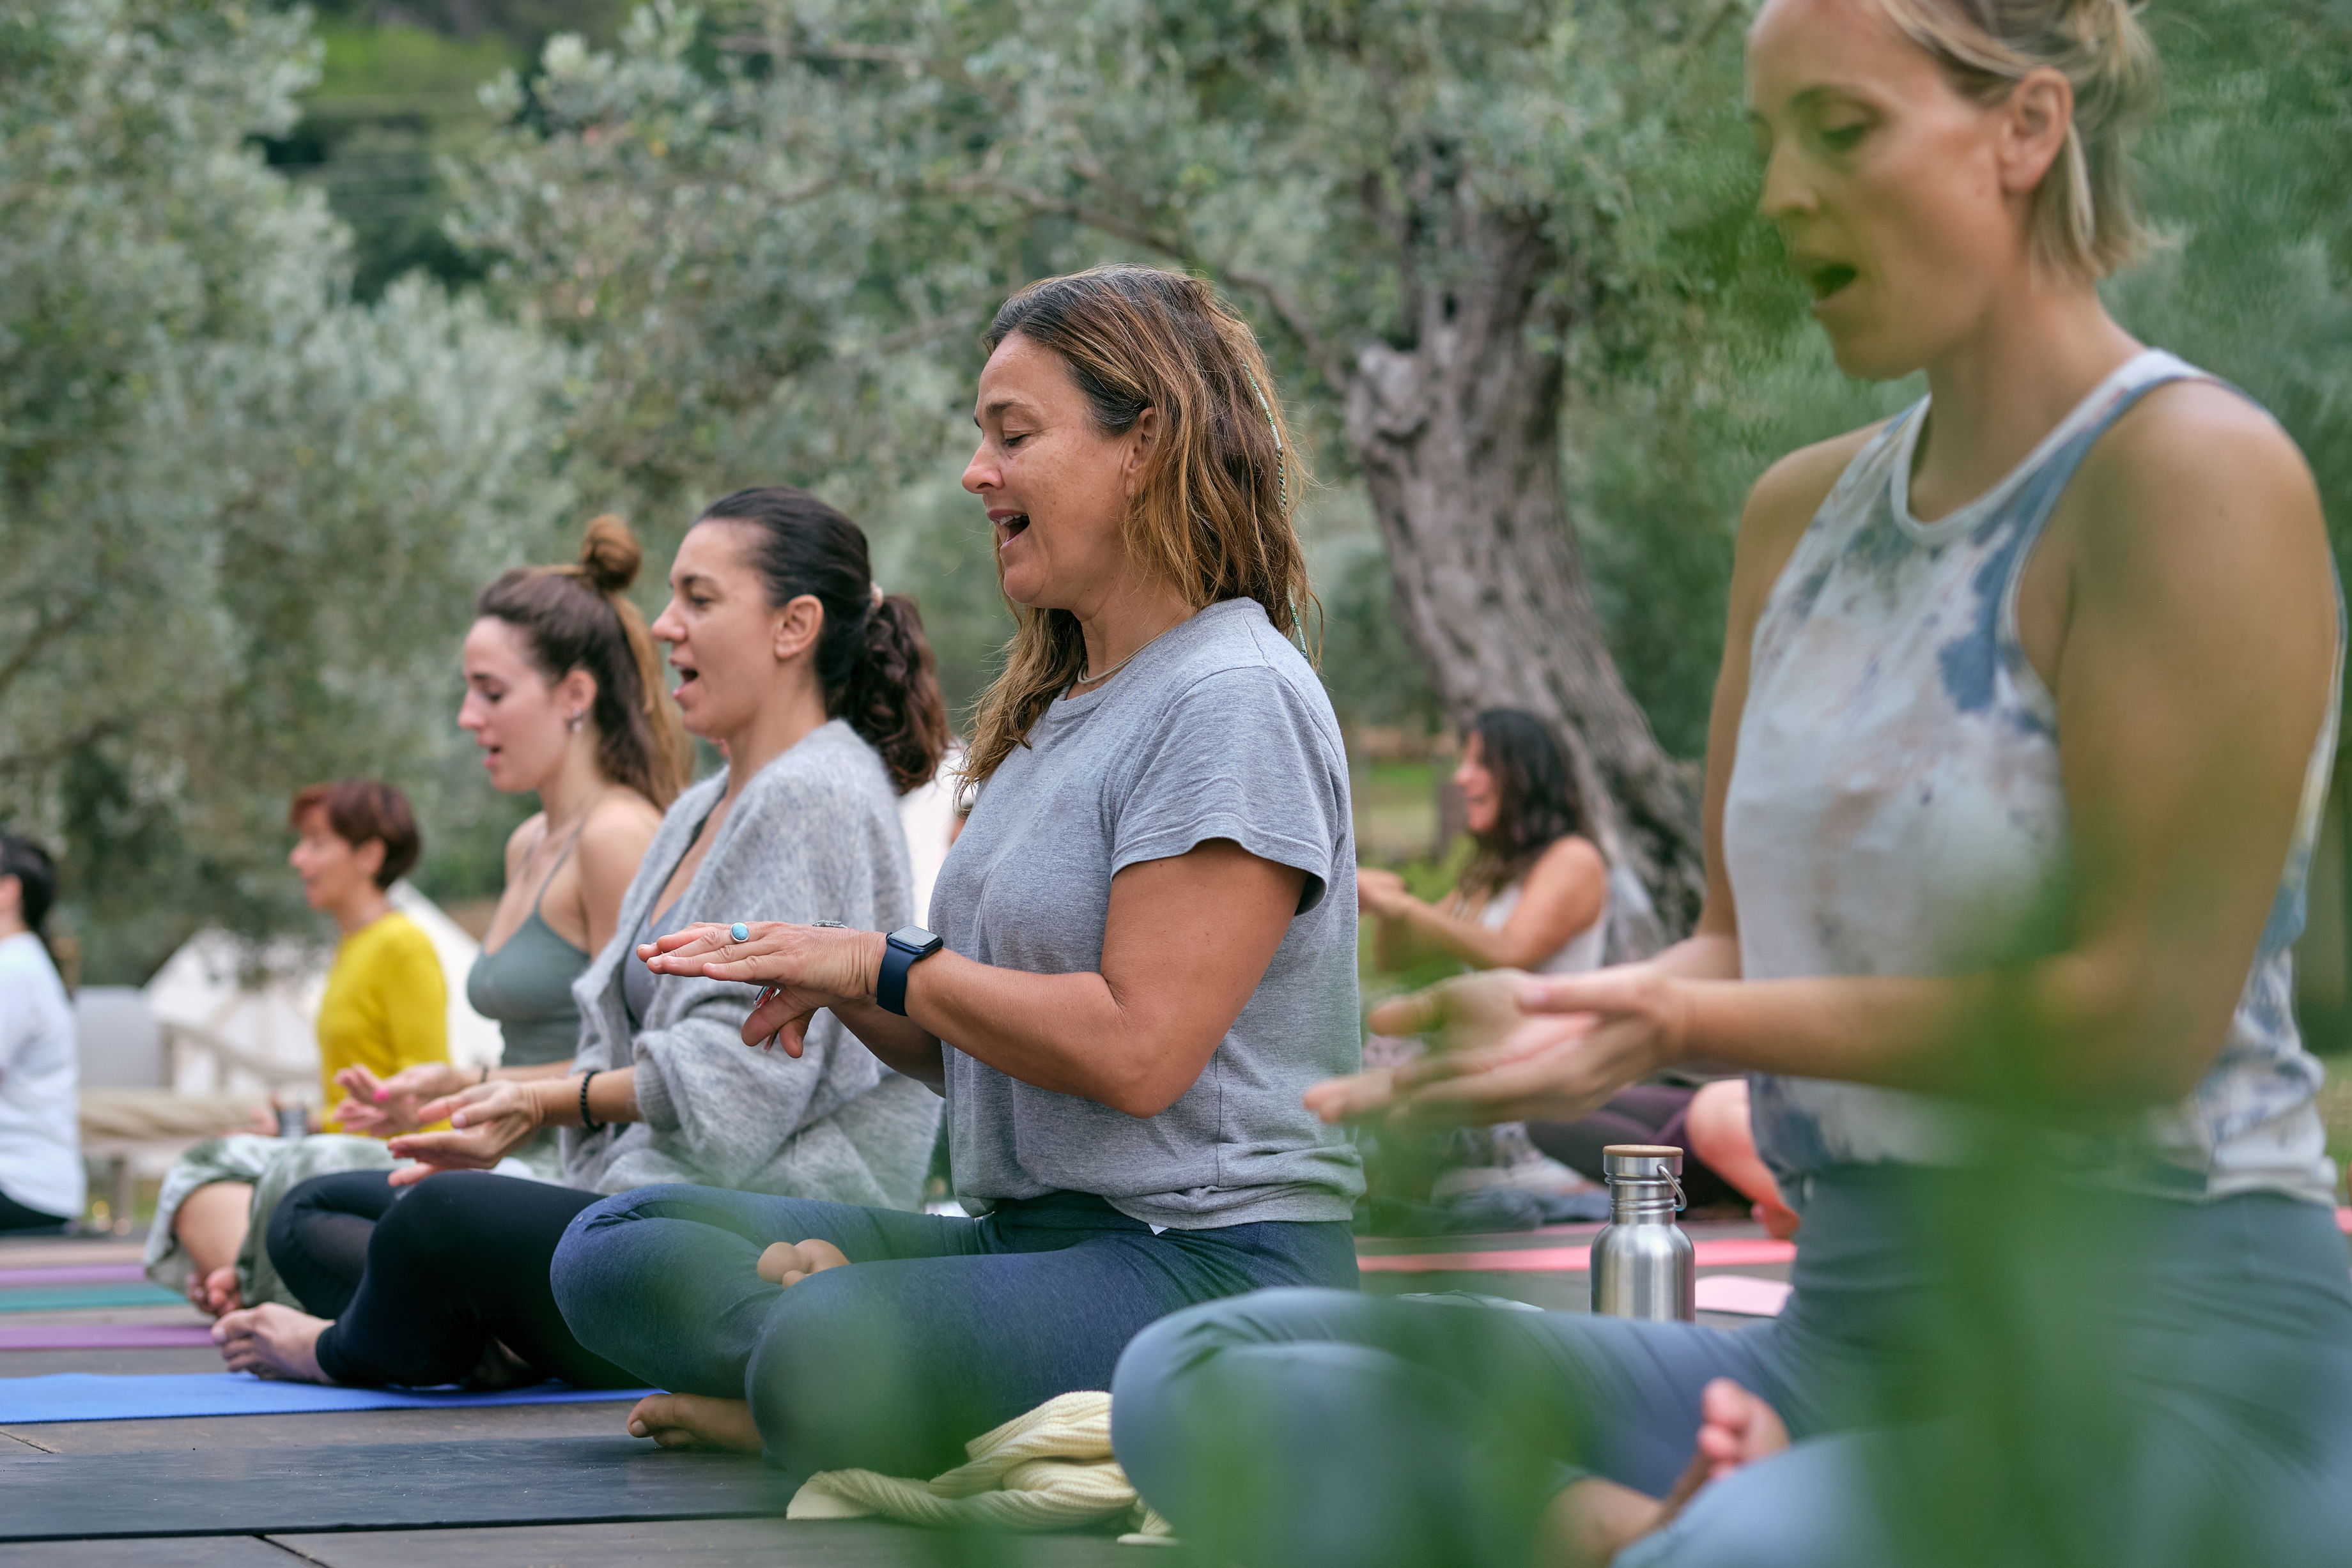 Women doing vocal exercises during yoga session